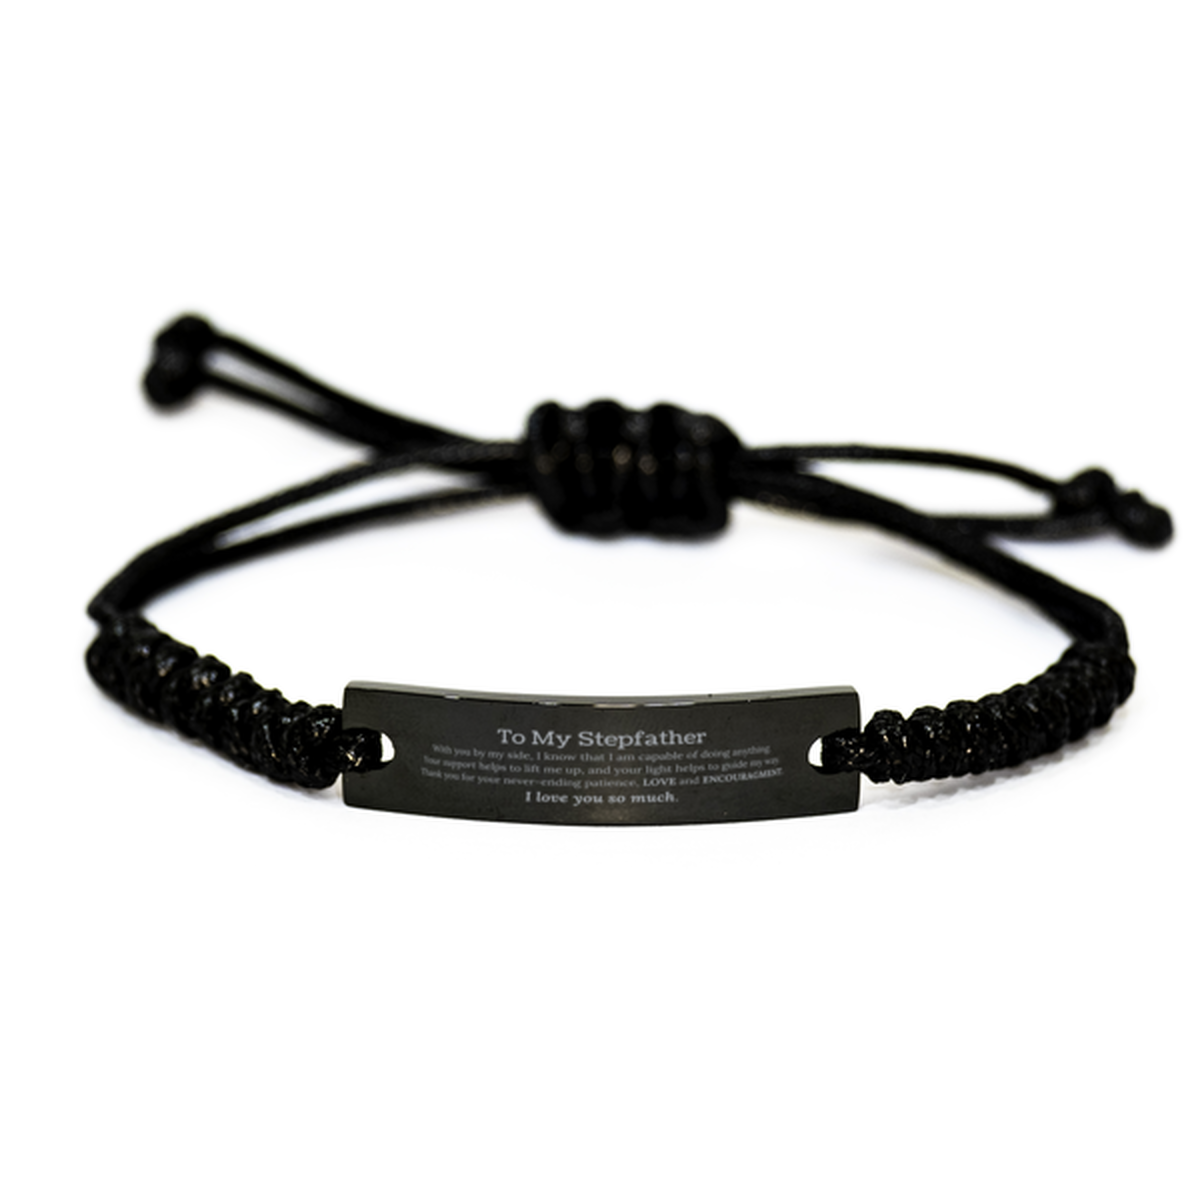 Appreciation Stepfather Black Rope Bracelet Gifts, To My Stepfather Birthday Christmas Wedding Keepsake Gifts for Stepfather With you by my side, I know that I am capable of doing anything. I love you so much